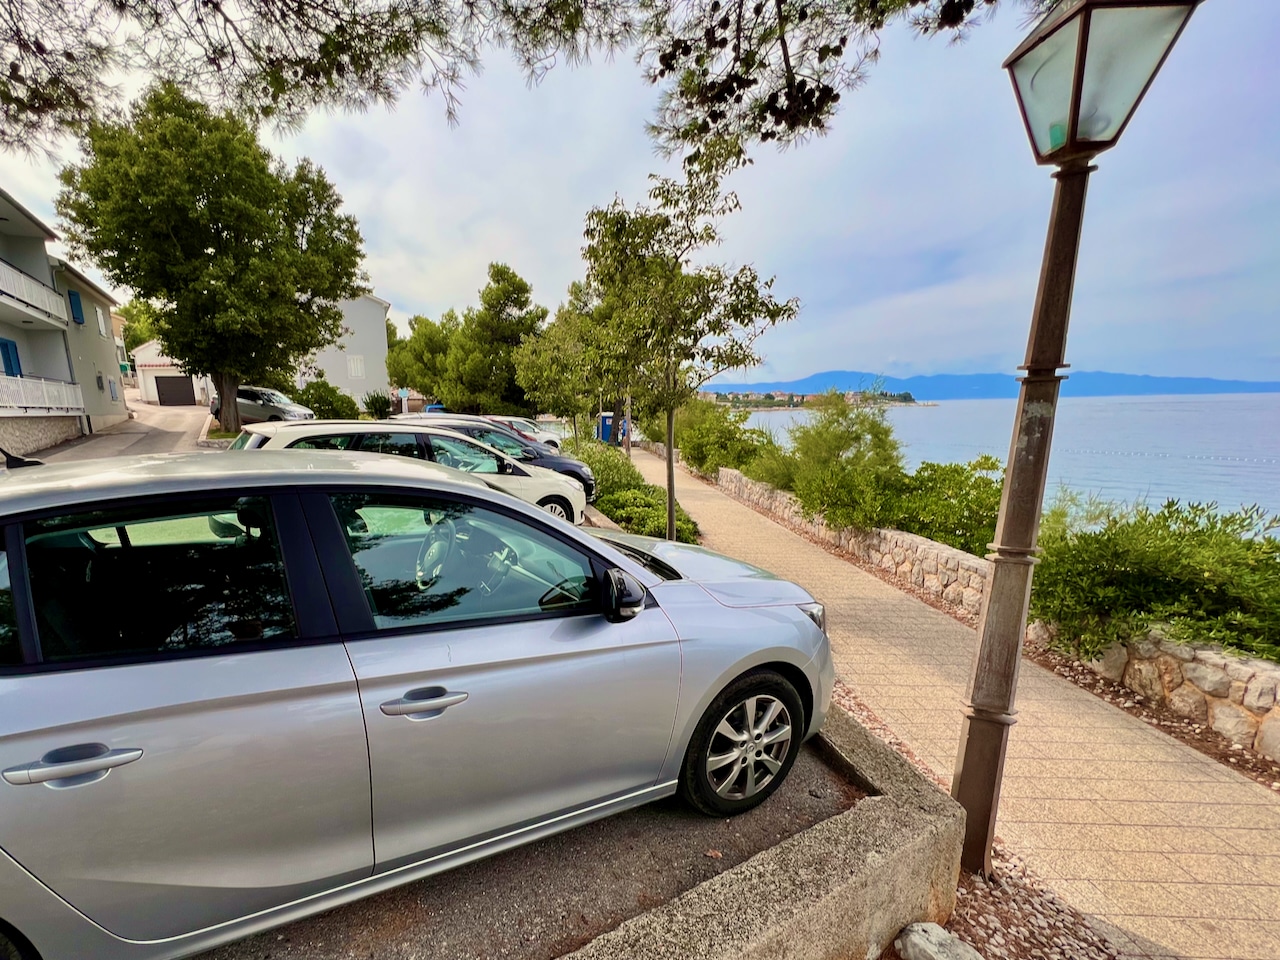 Rare treat: Sometimes you can find a free parking space right by the sea on Krk - but that is definitely a rarity. Photo: Sascha Tegtmeyer Rental car Krk experience report - car routes on the island